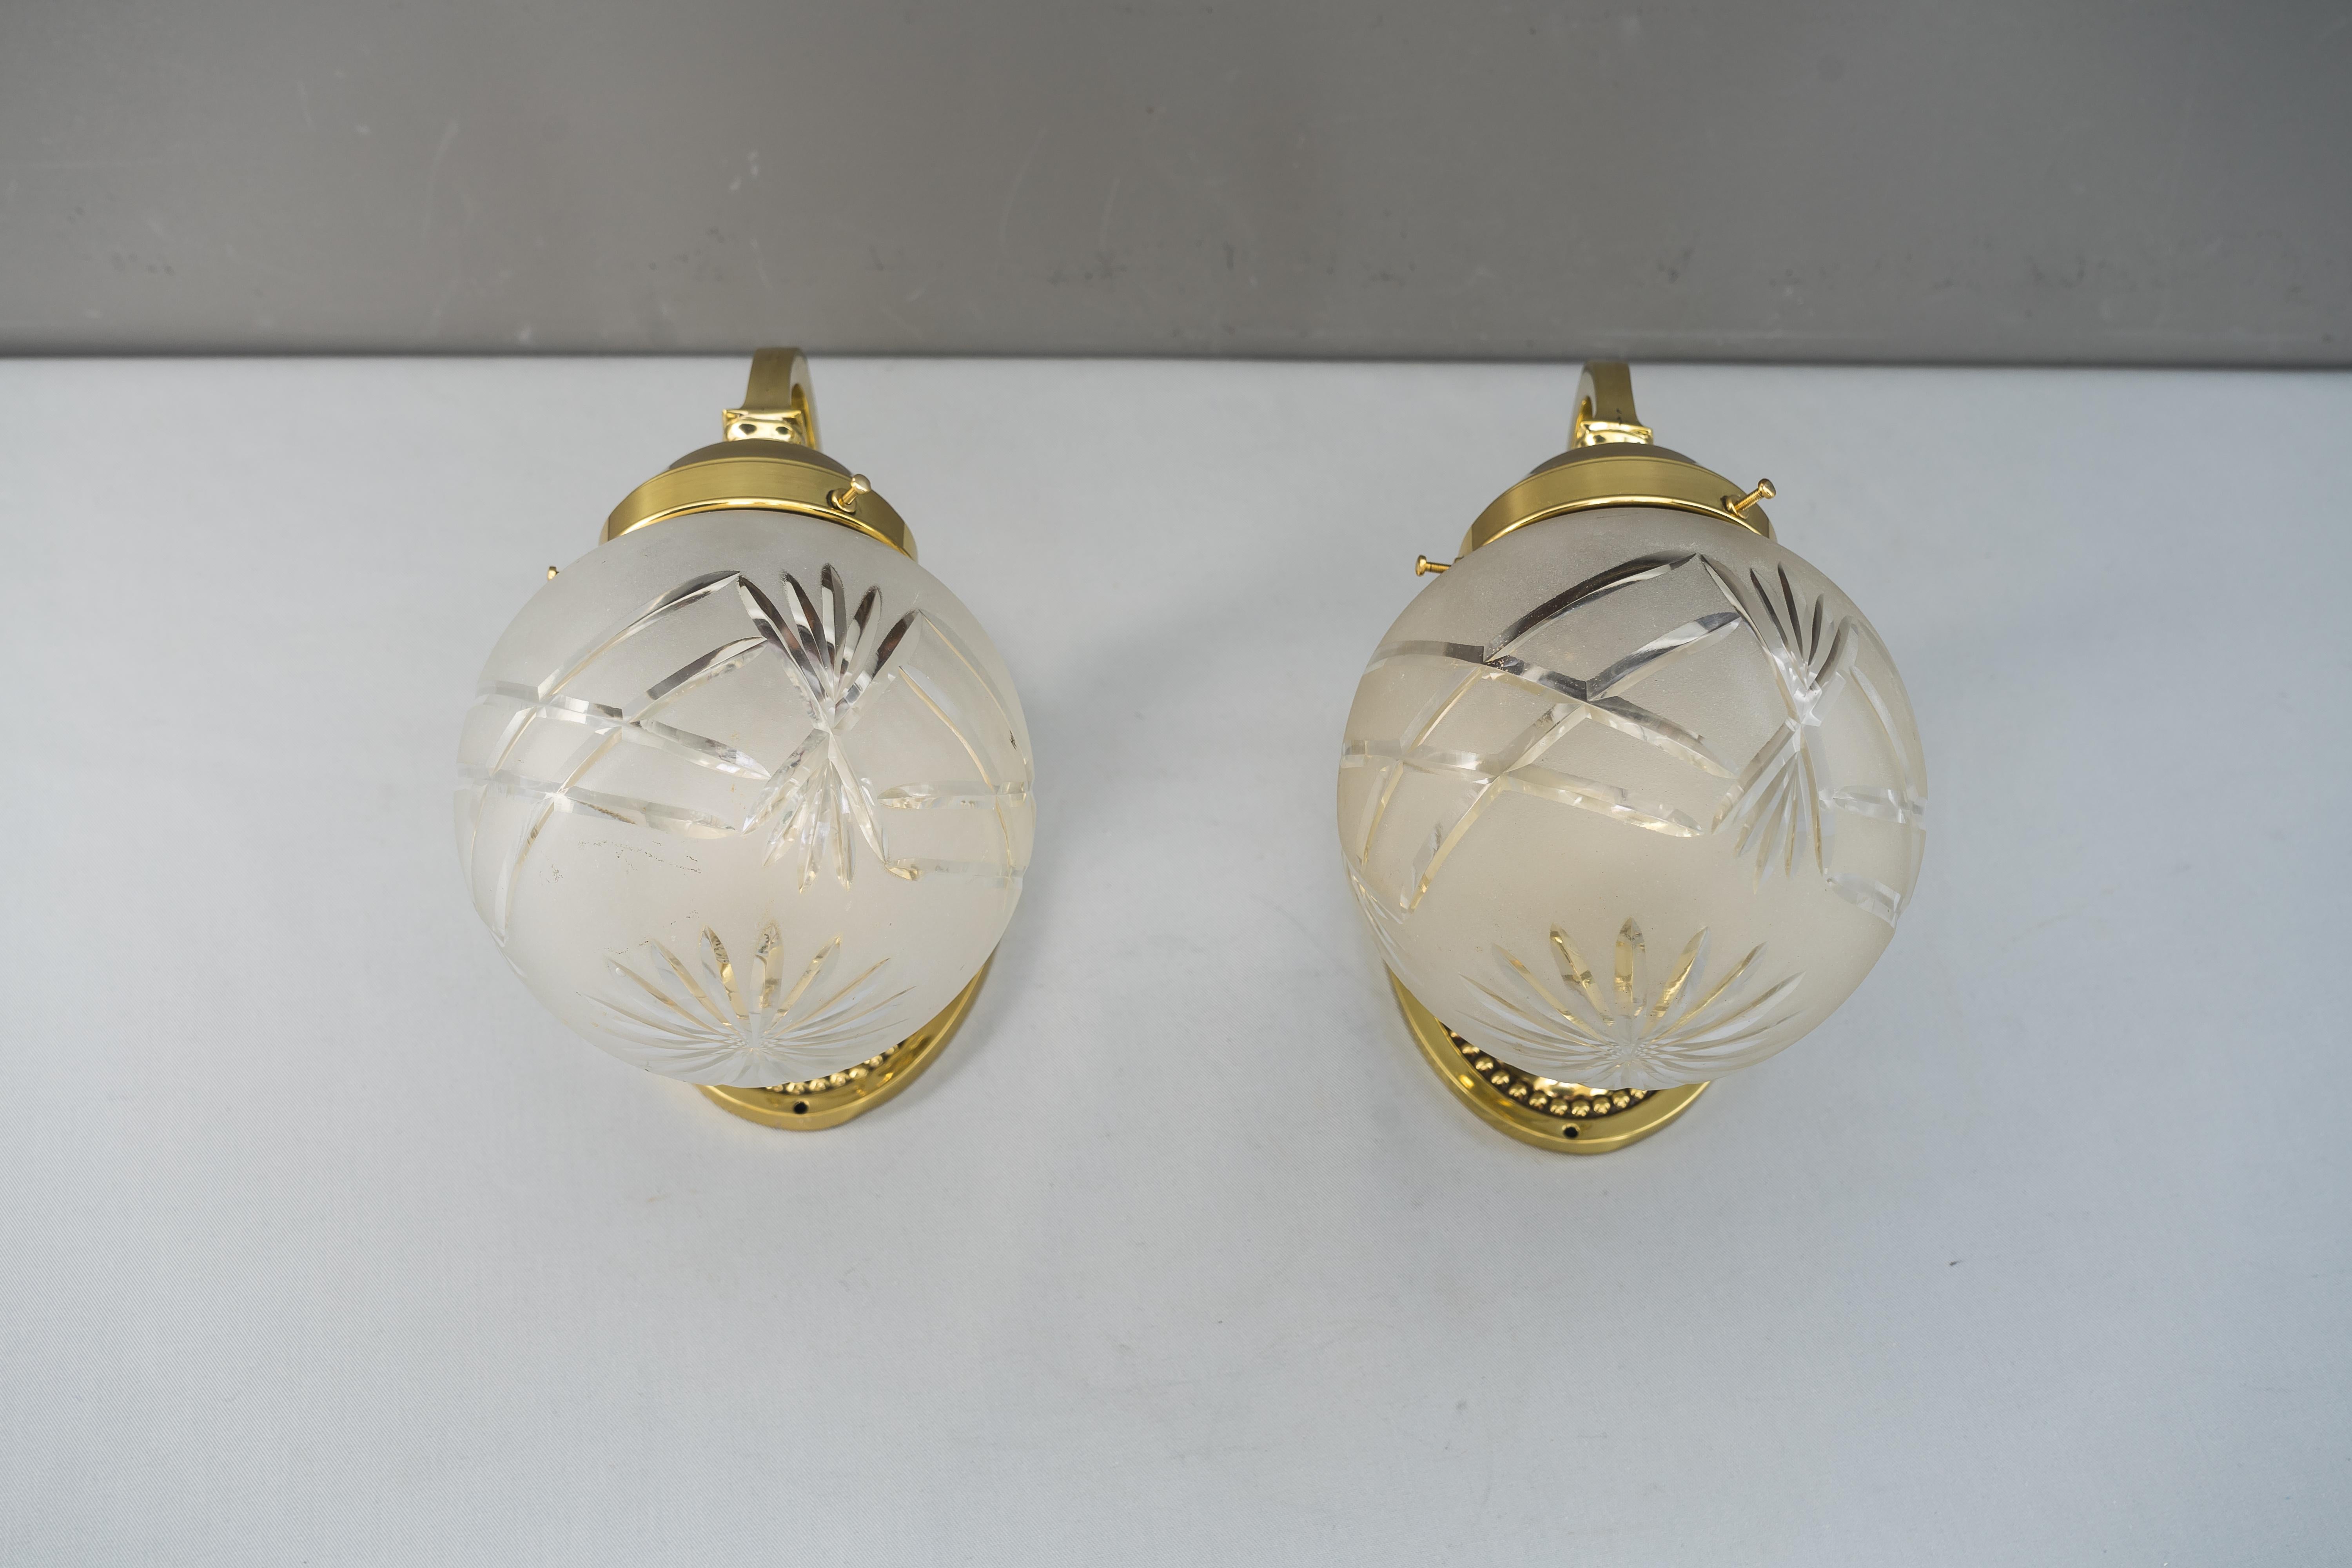 Two historistic wall lamps, circa 1890s
Polished and stove enameled
Original cut glasses.